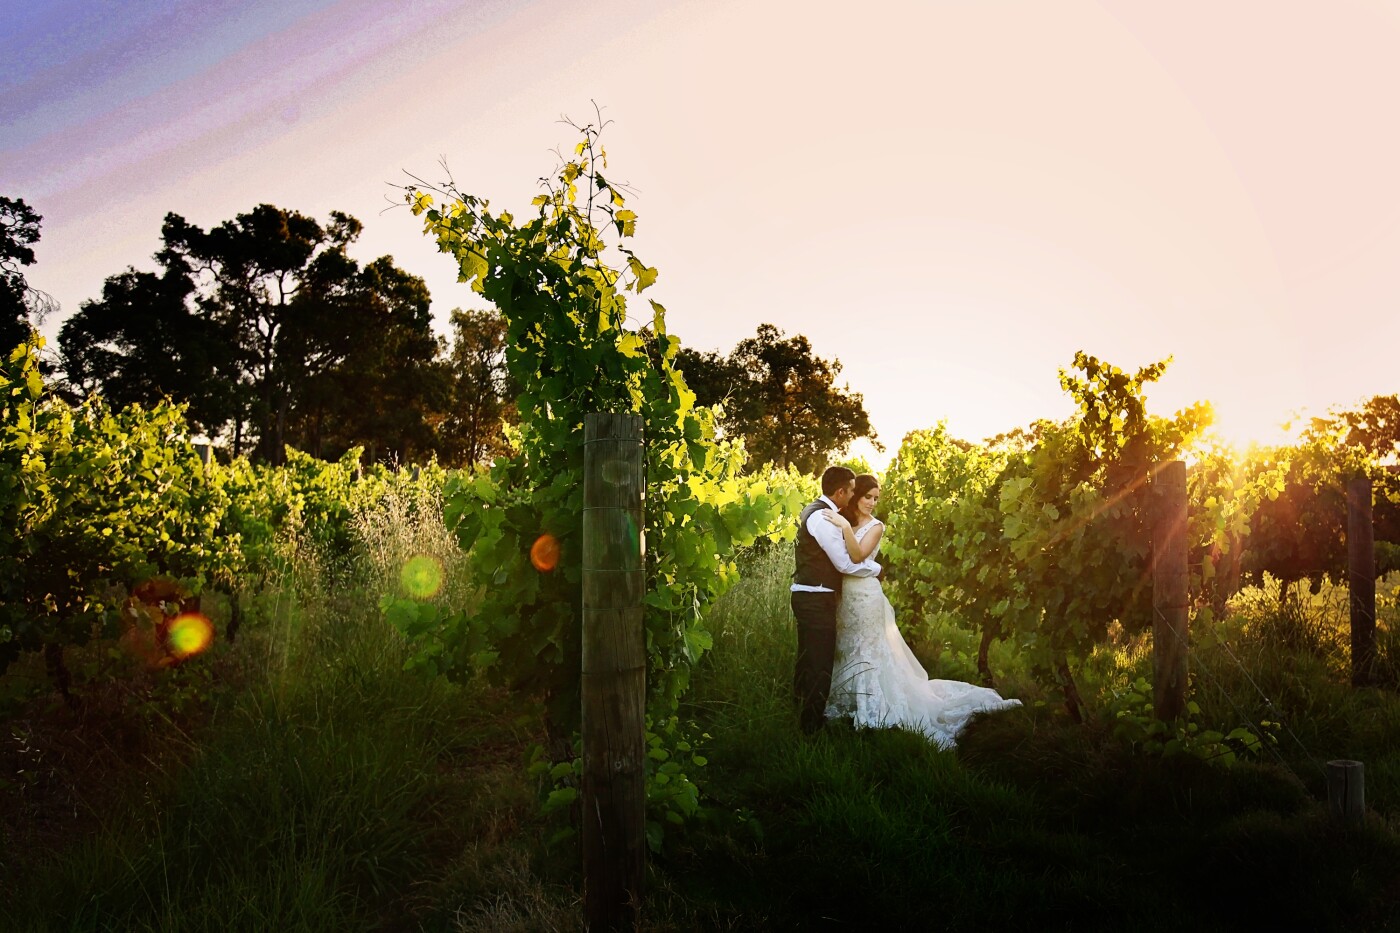 Sandalford Winery in the Swan Valley of Western Australia, provided an absolutely flawless backdrop for the Wedding of Robbie and Jade. With the setting sun, flaring through the vines and high grass, the scene was set for this breathtaking photo of such a stunning couple.